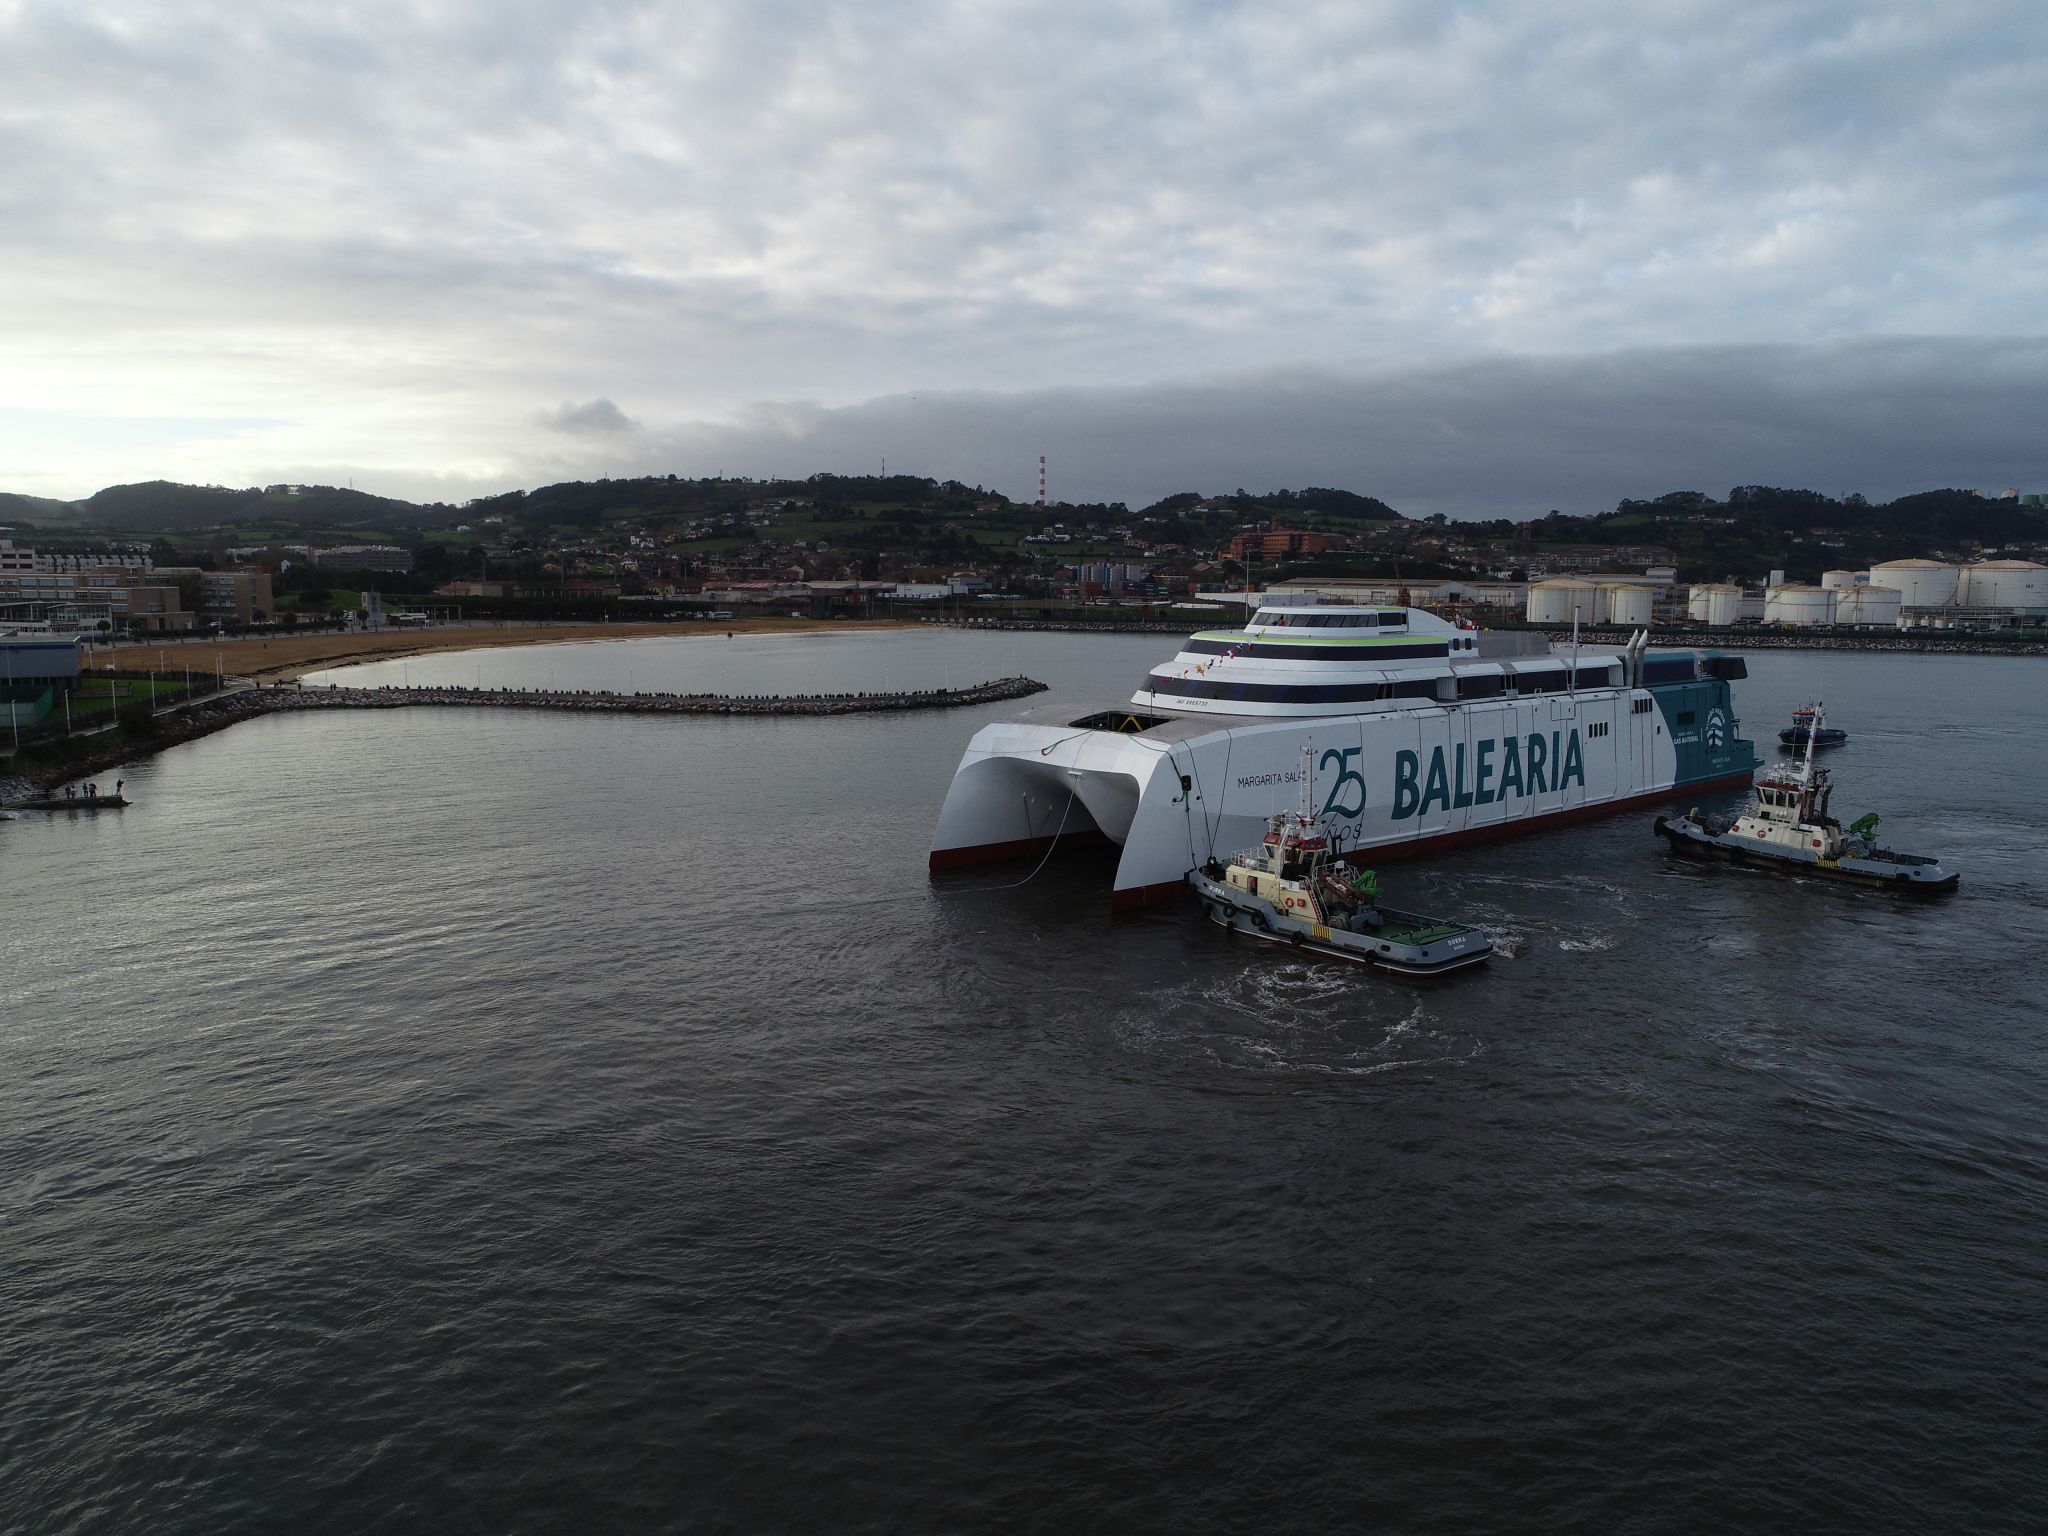 Balearia's second LNG-powered fast ferry launched in Spain